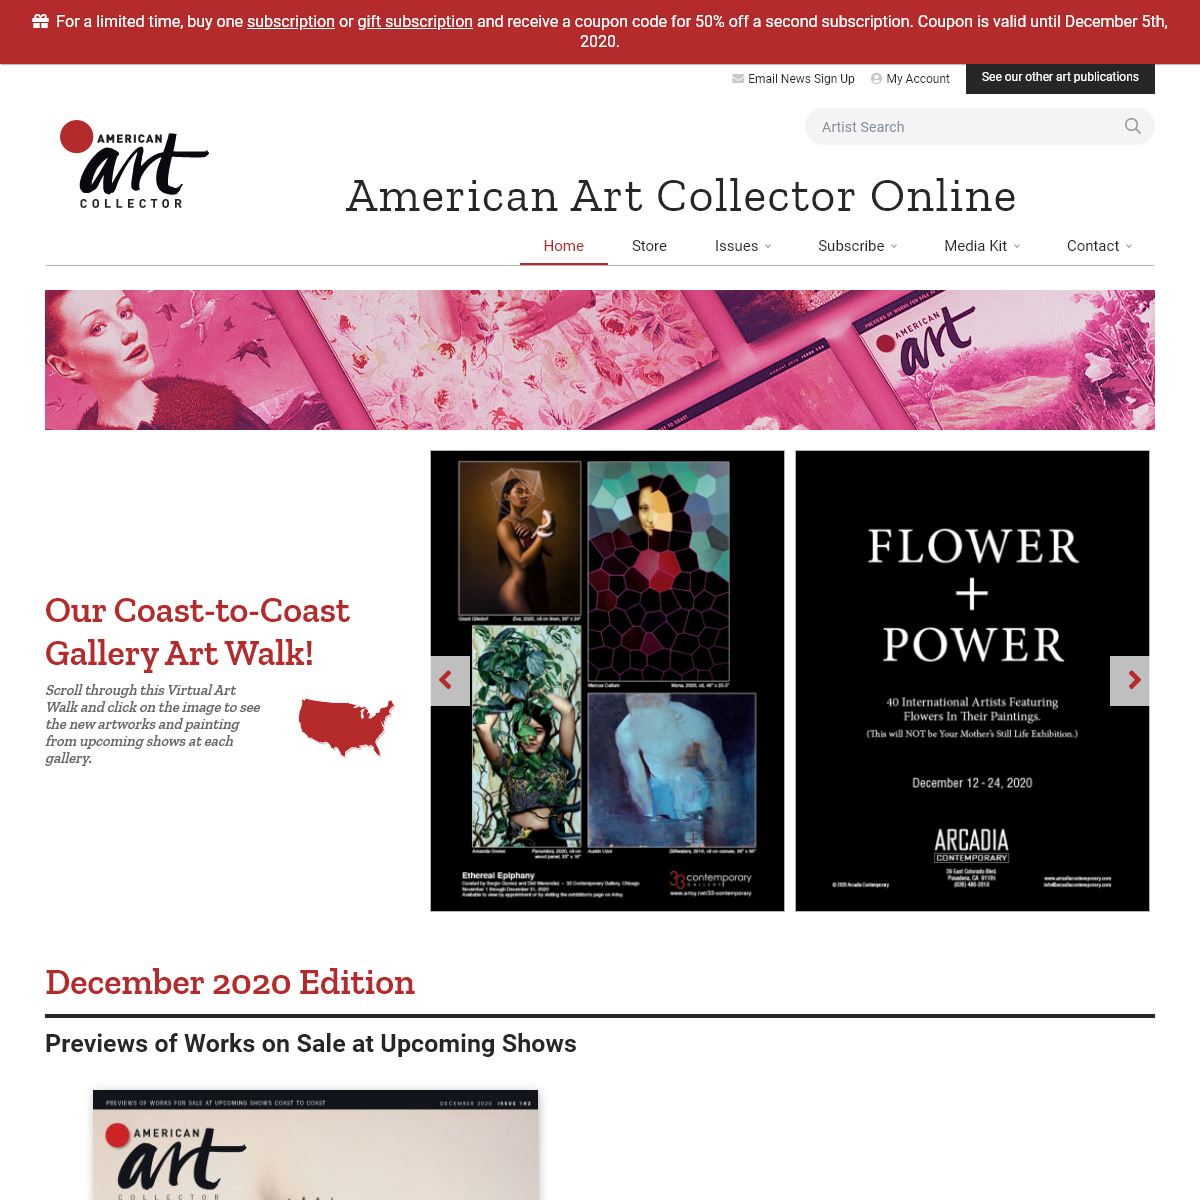 A complete backup of americanartcollector.com